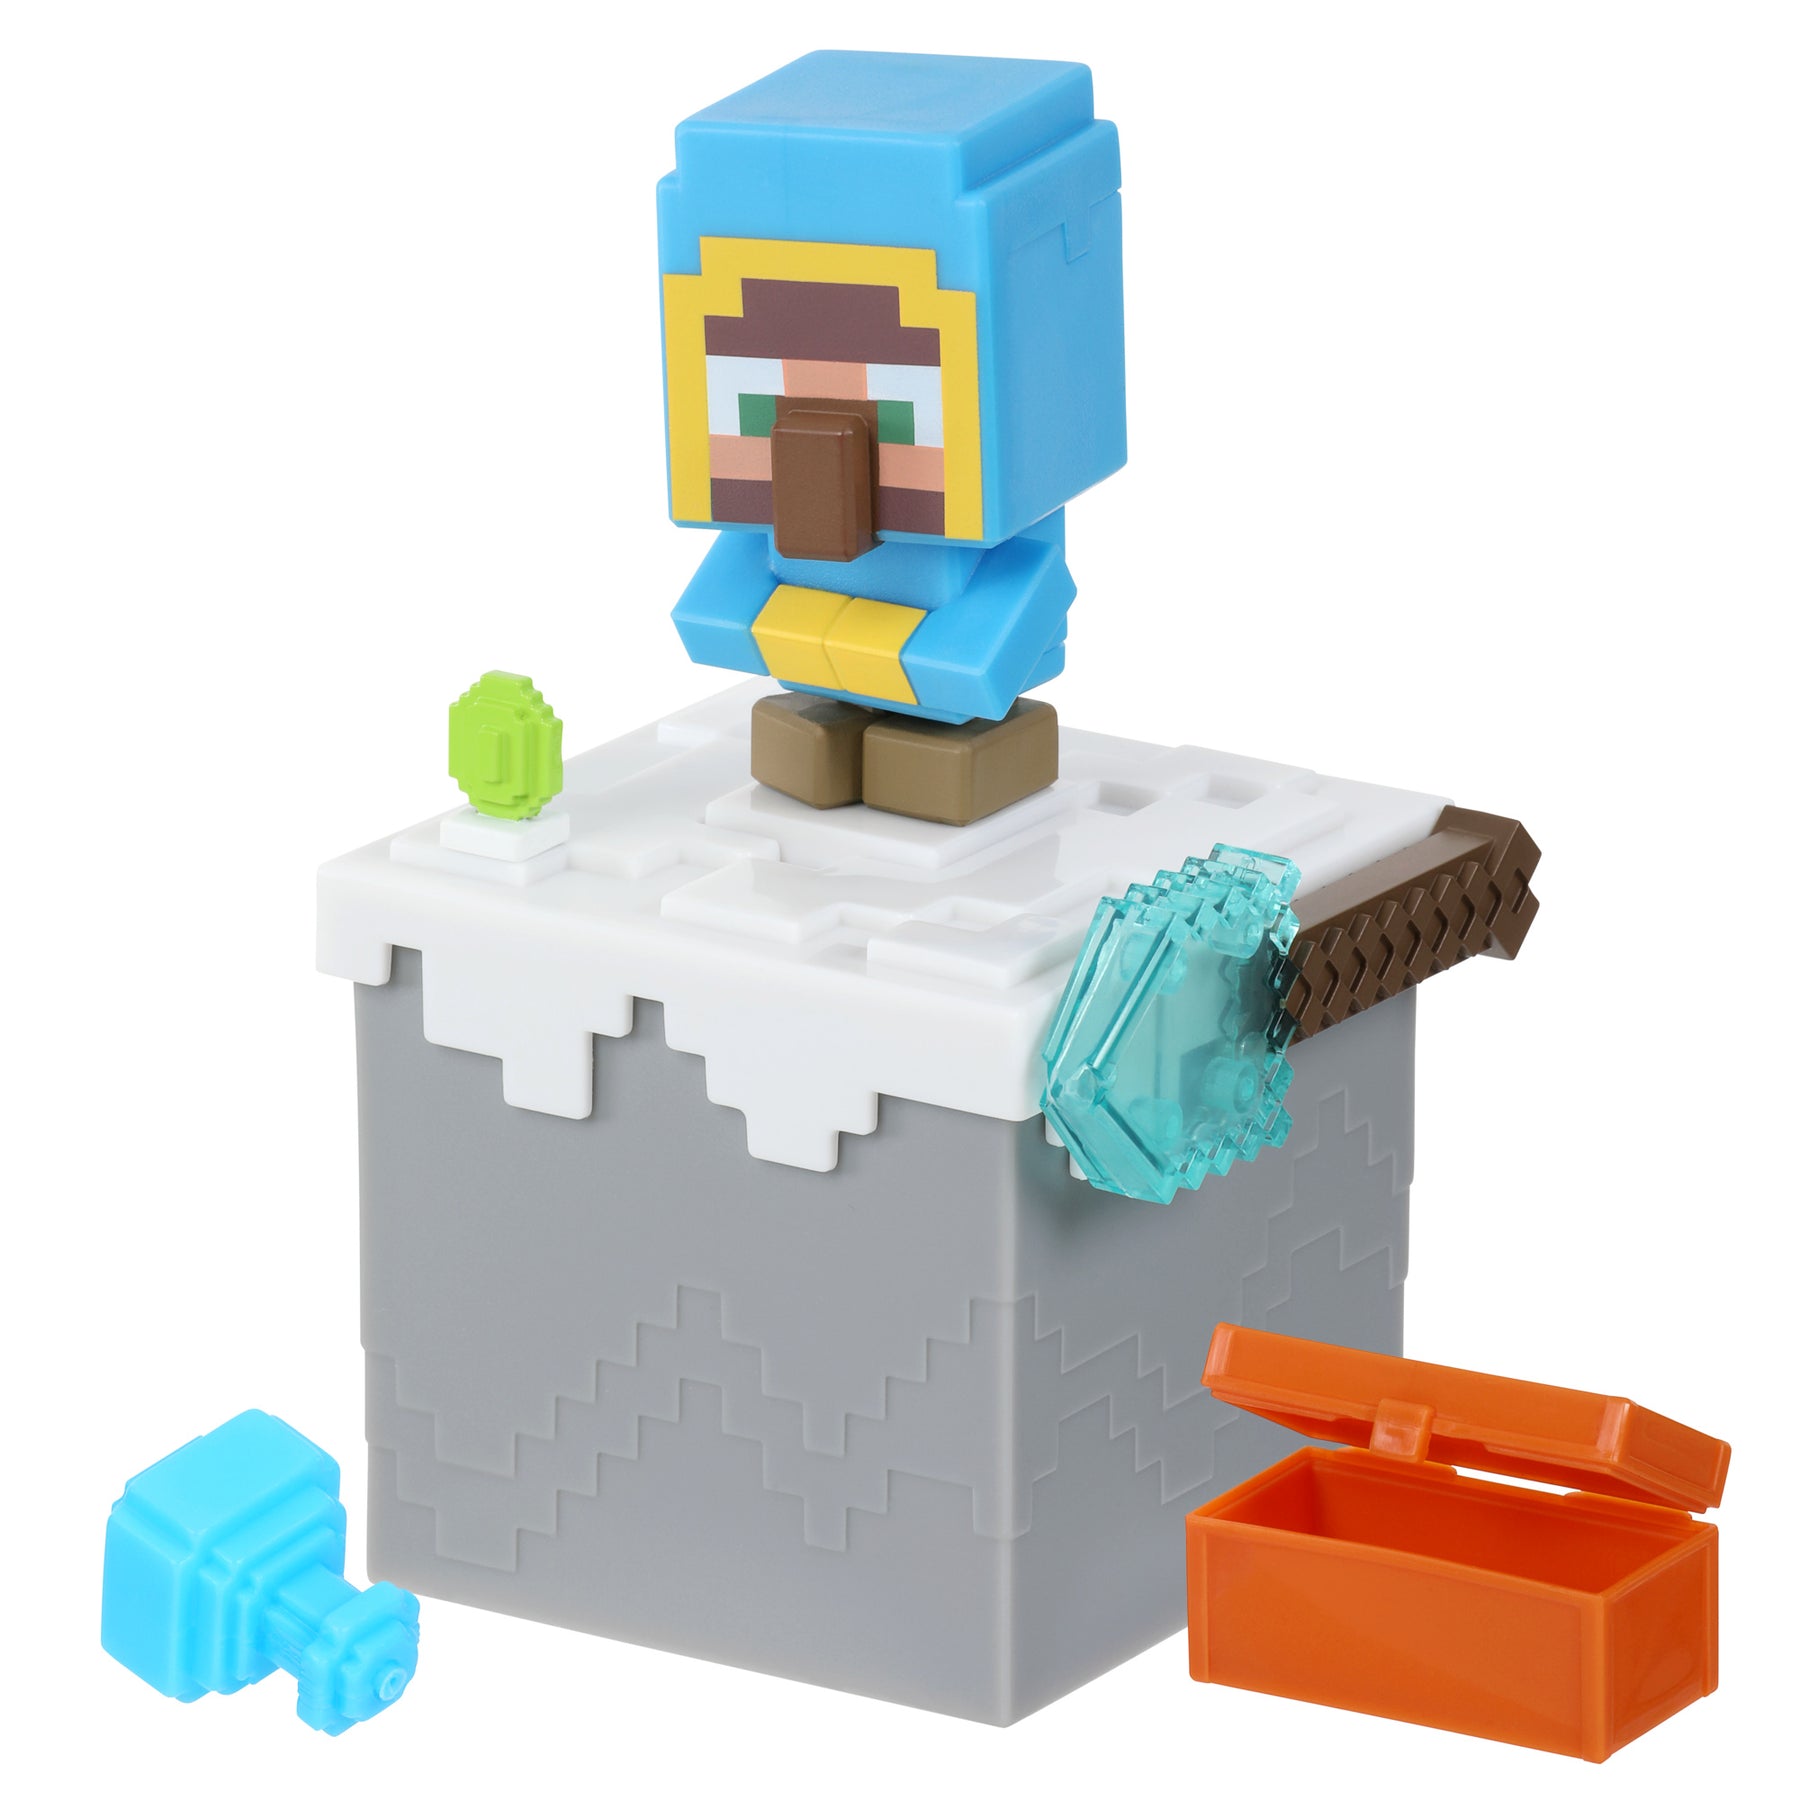 Minecraft Toys 3.25-inch Action Figures Collection, Glow Squid